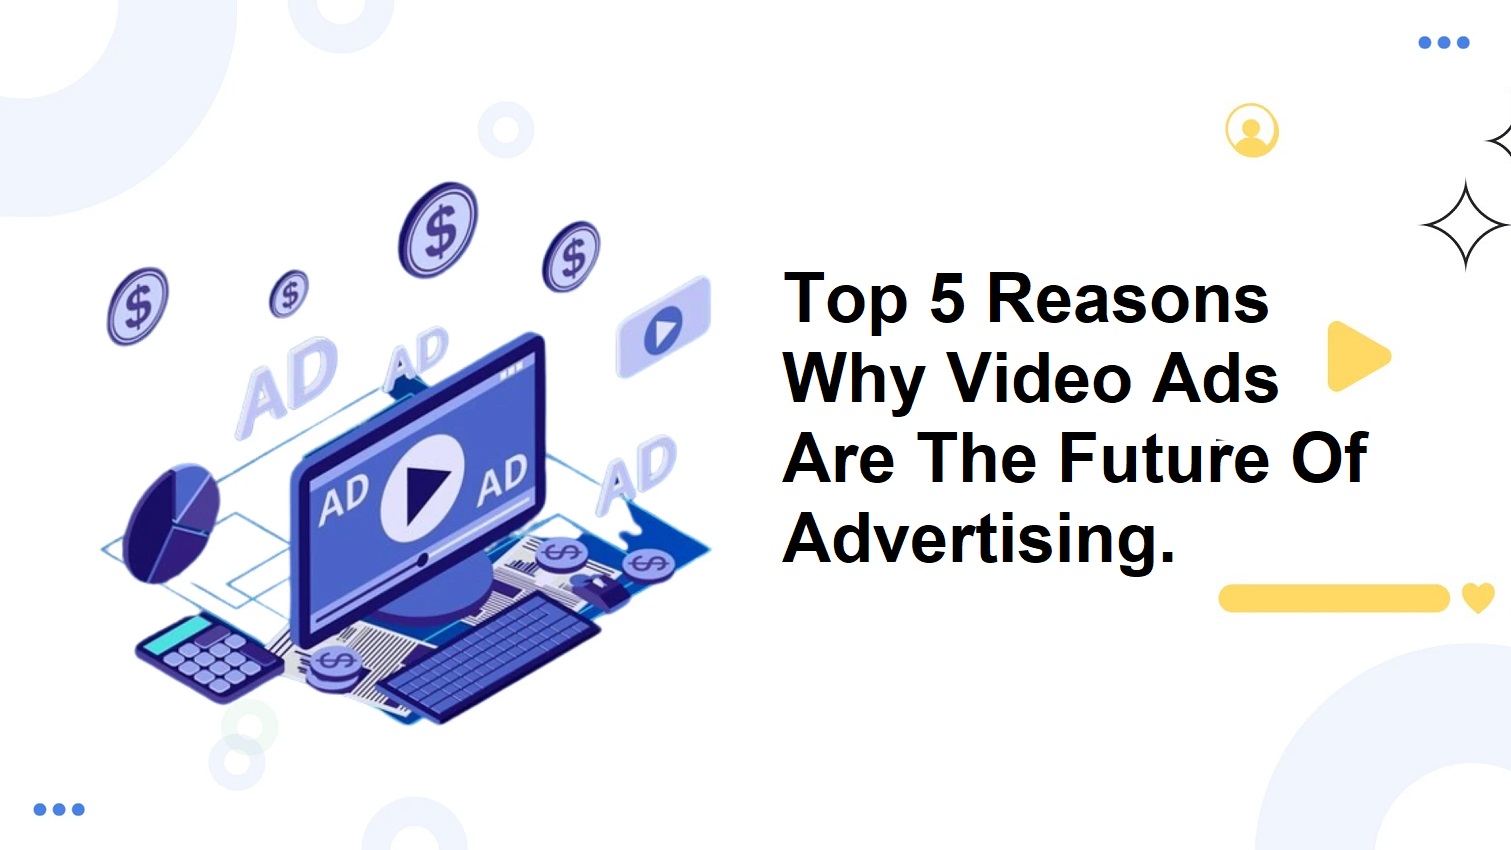 Top 5 Reasons Why Video Ads Are The Future Of Advertising